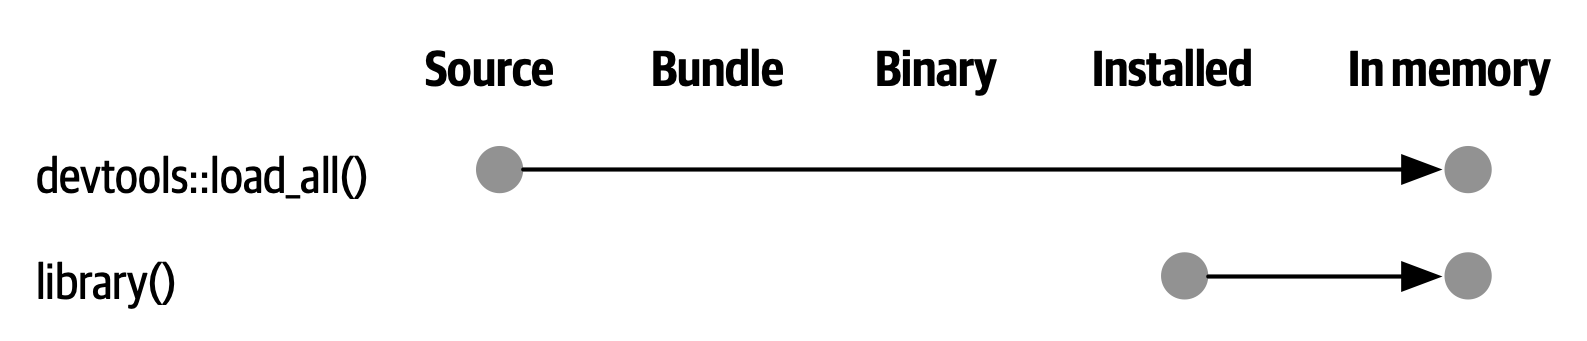 Diagram listing five package states: source, bundle, binary, installed, in memory. Two functions for converting a package from one state to another are depicted. First, `devtools::load_all()` is shown to convert a source package to one that is in memory. Second, `library()` is shown to put an installed package in memory.